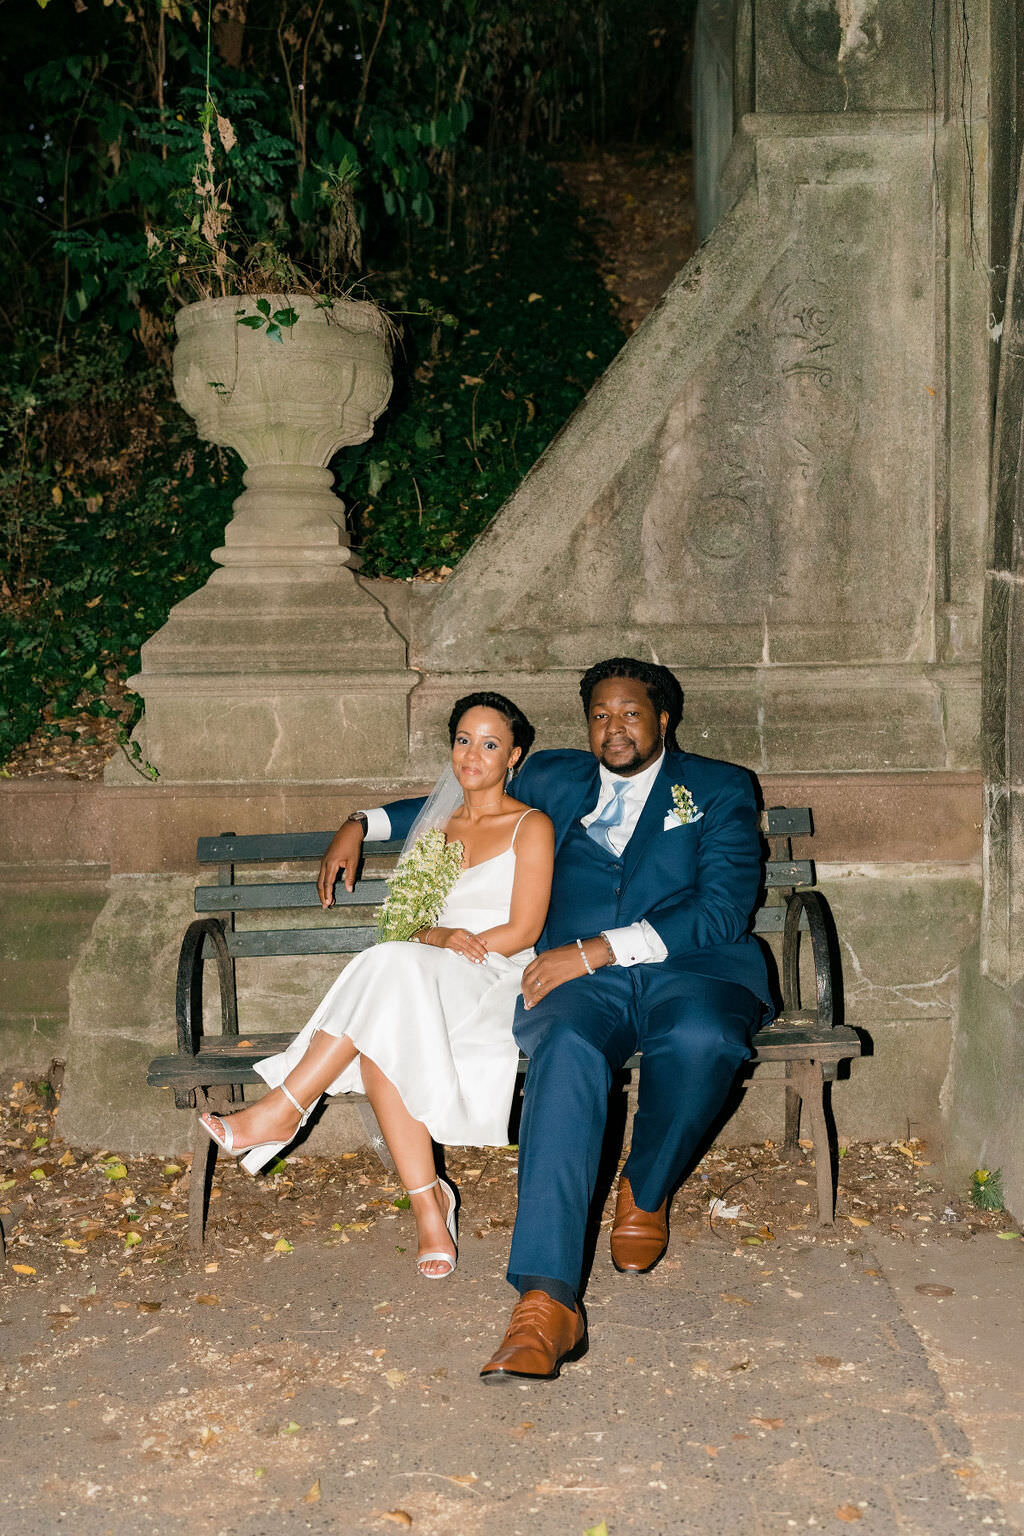 bride leaning up against groom as they sit on a park bench at night